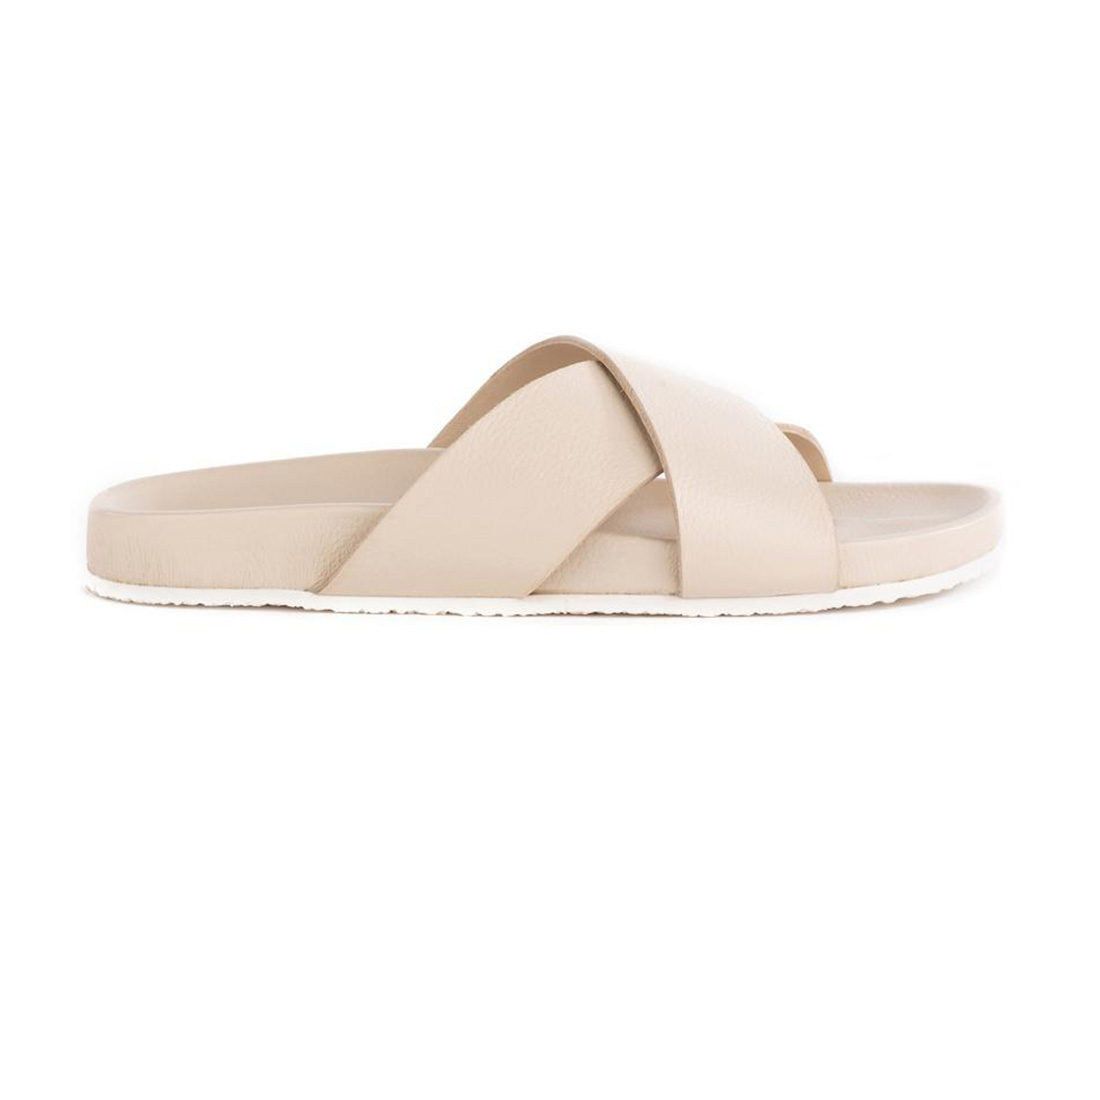 seychelles lighthearted slide in off white leather 84447